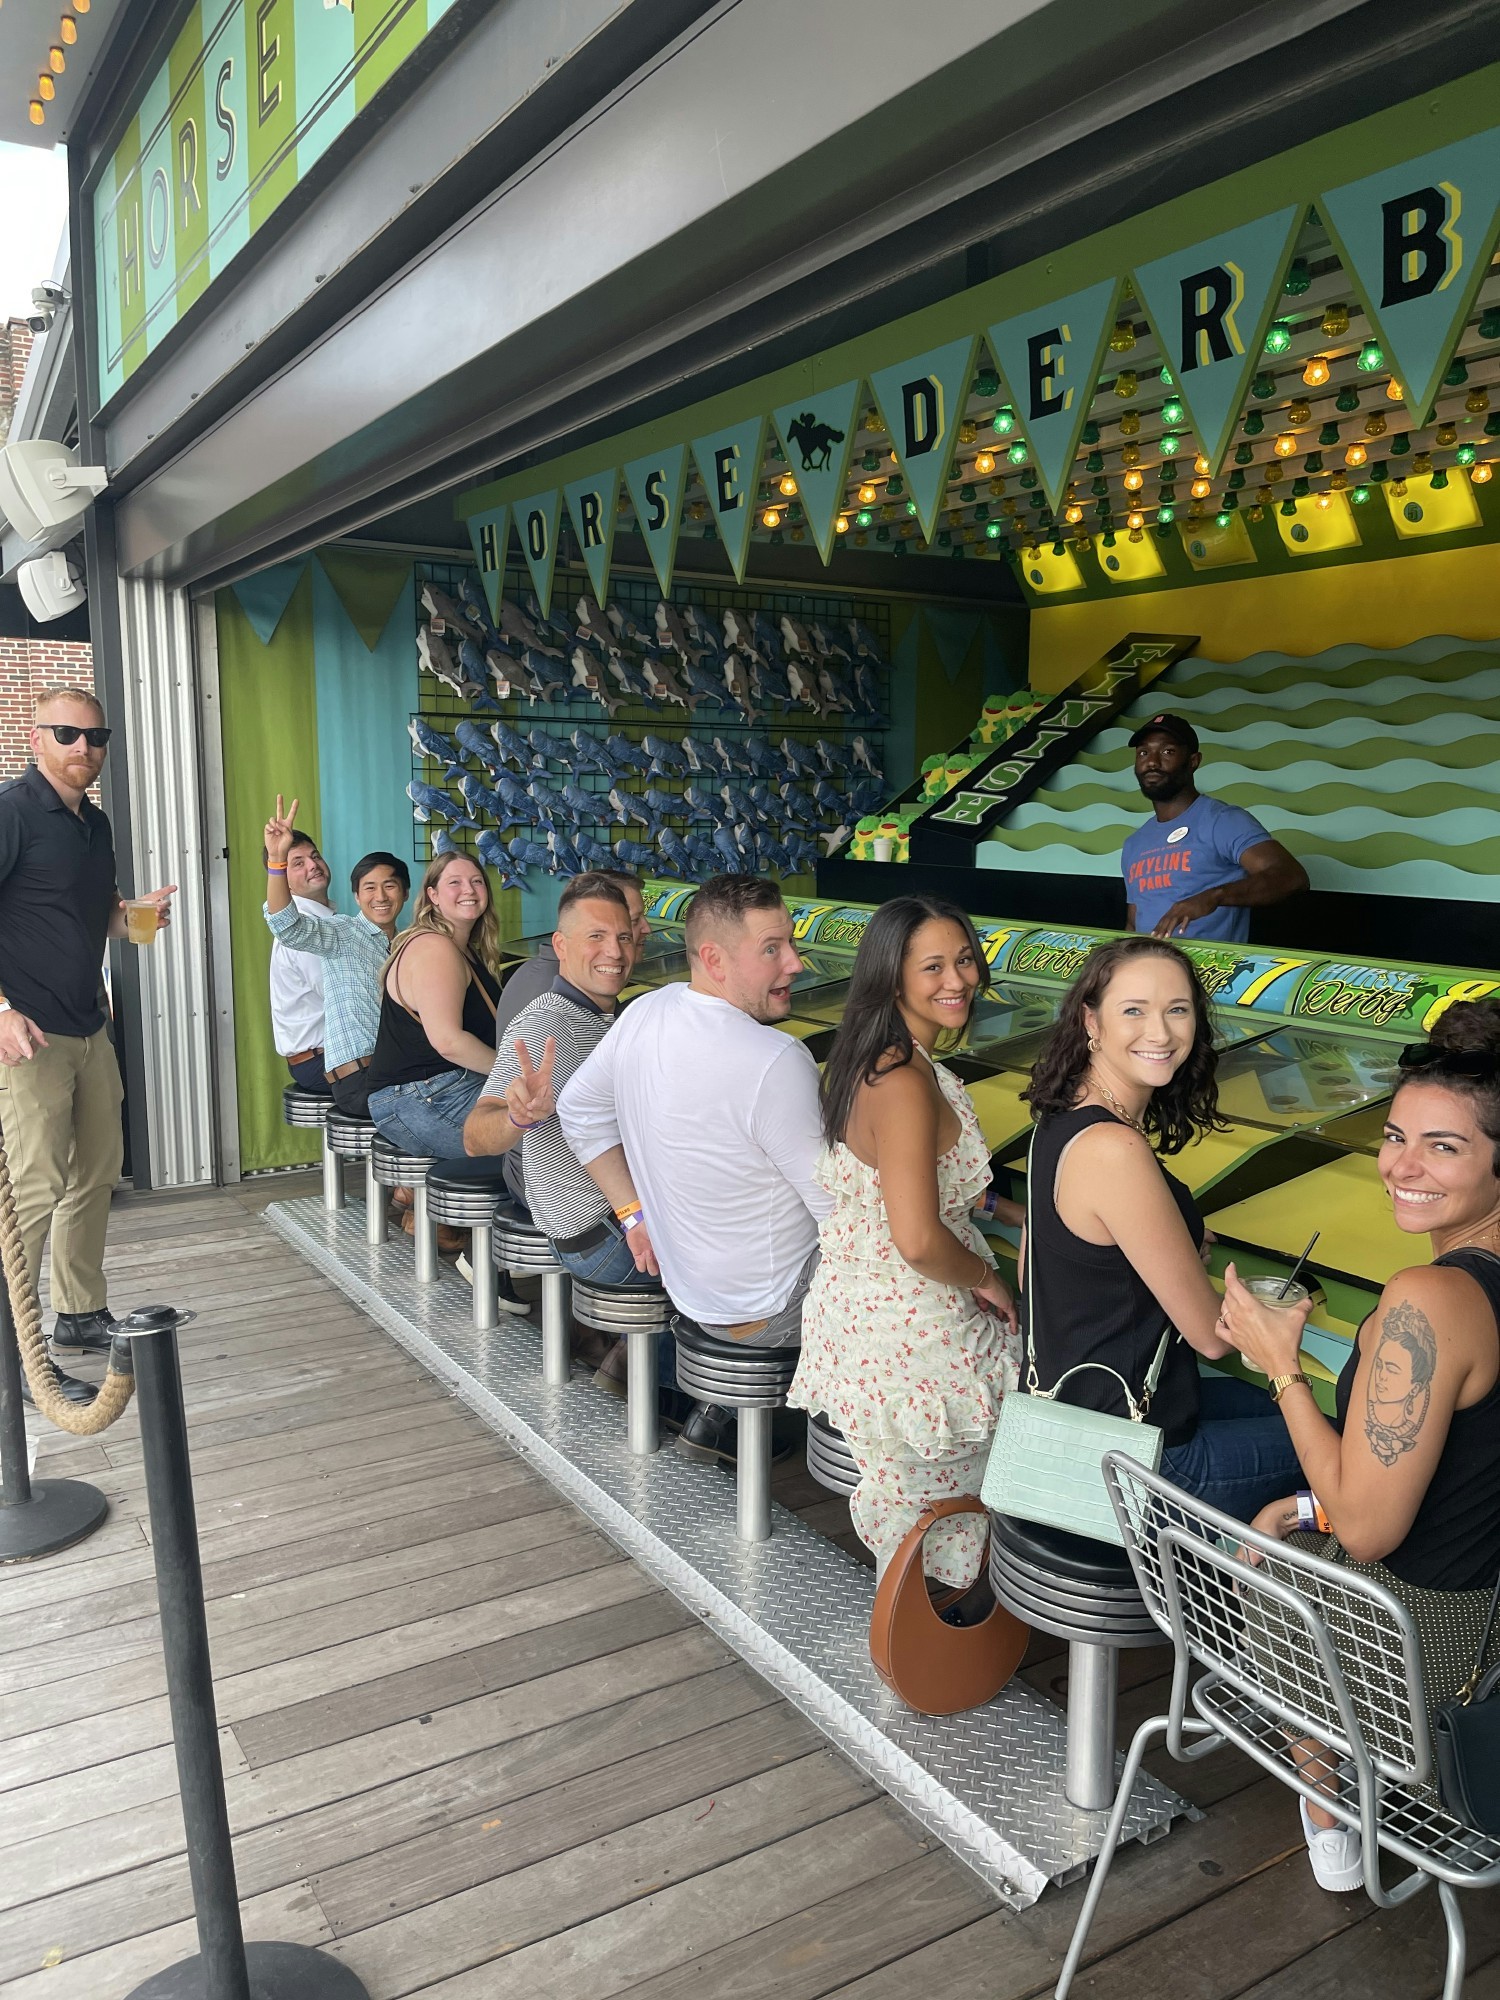 Our Atlanta's team annual Summer outing at Ponce City Market.